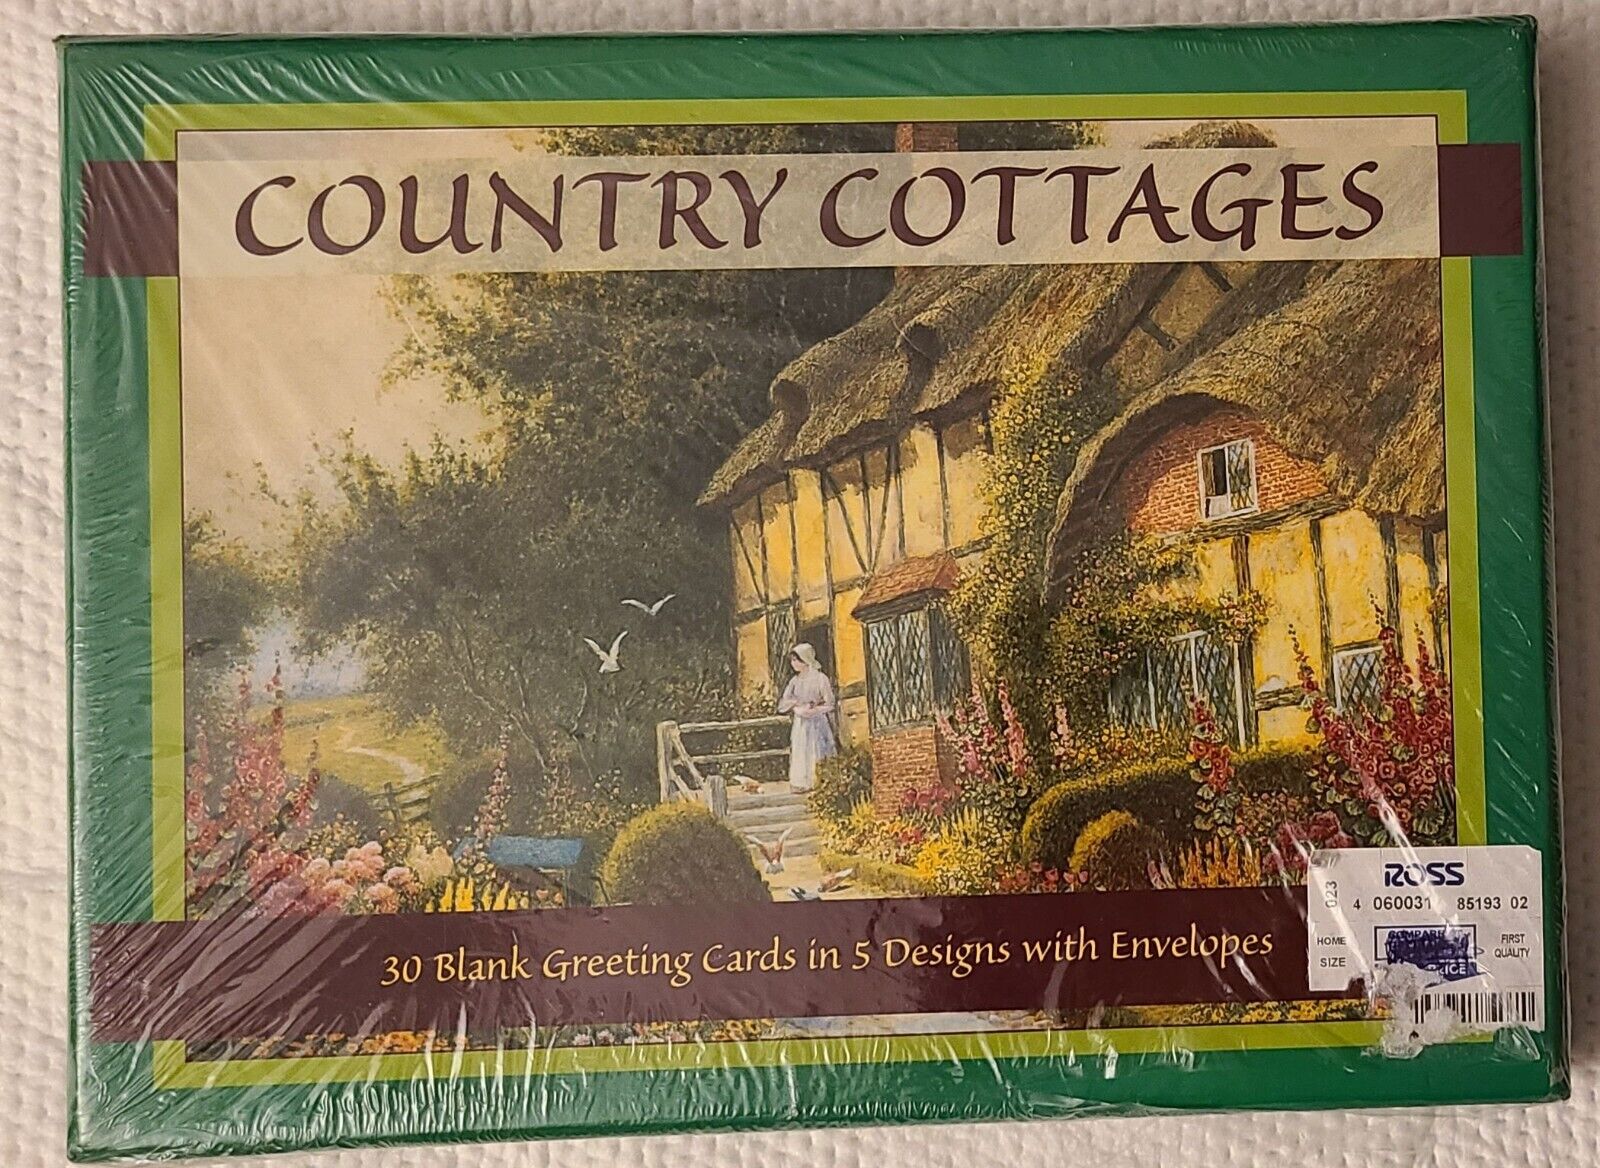 VINTAGE COUNTRY COTTAGE GREETING CARDS BY ROBERT  FREDRICK LTD. (2001) NEW